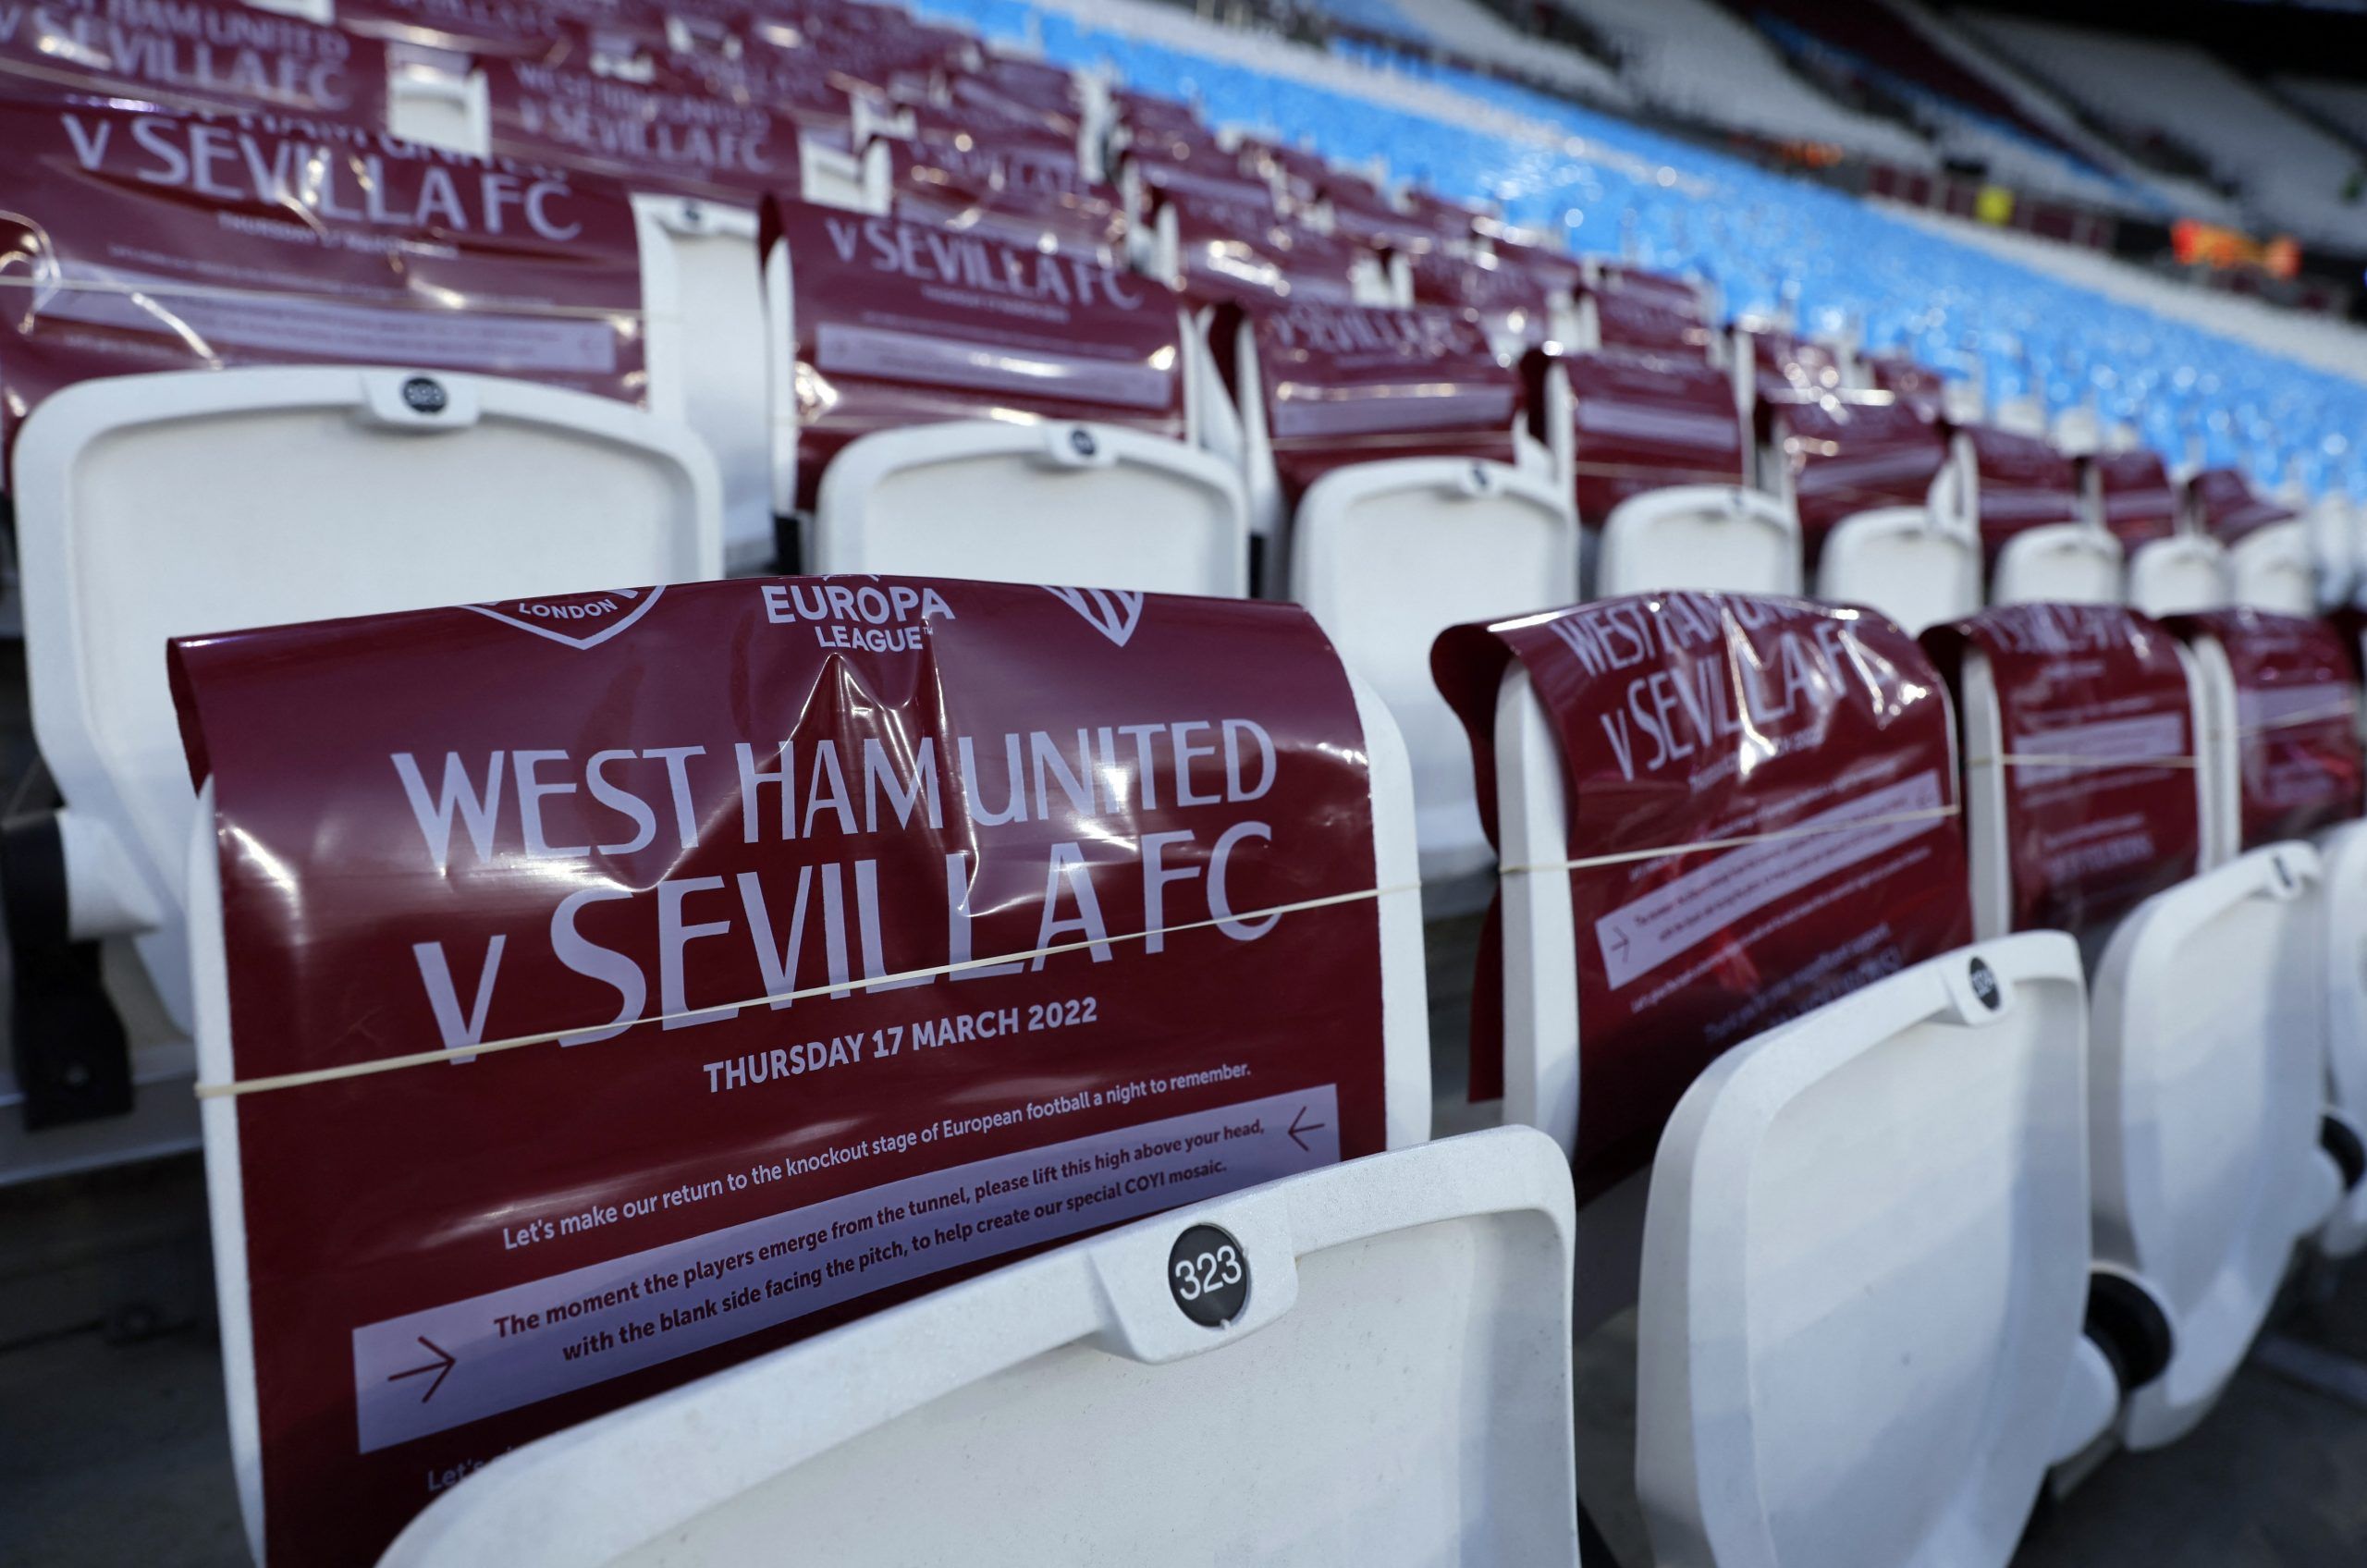 Soccer Football - Europa League - Round of 16 Second Leg - West Ham United v Sevilla - London Stadium, London, Britain - March 17, 2022  General view of banners on the seats inside the stadium before the match Action Images via Reuters/Andrew Couldridge